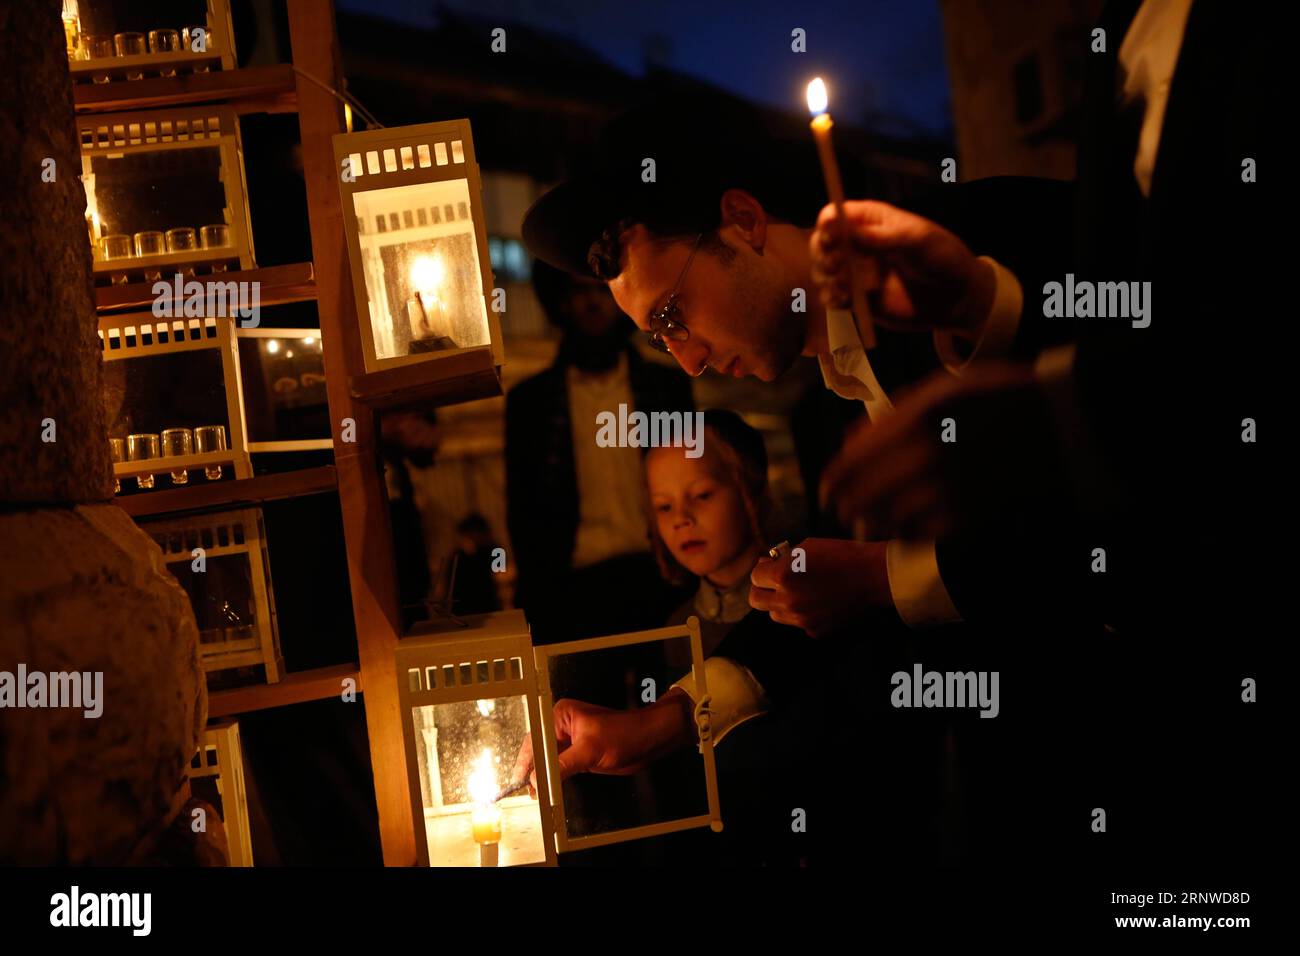 (171214) -- JERUSALEM, Dec. 14, 2017 -- An ultra-Orthodox Jewish man lights a candle during Hanukkah in Mea Shearim neighborhood in Jerusalem, on Dec. 14, 2017. Hanukkah, also known as the Festival of Lights and Feast of Dedication, is an eight-day Jewish holiday commemorating the rededication of the Holy Temple (the Second Temple) in Jerusalem at the time of the Maccabean Revolt against the Seleucid Empire of the 2nd Century B.C. ) MIDEAST-JERUSALEM-HANUKKAH GilxCohenxMagen PUBLICATIONxNOTxINxCHN Stock Photo